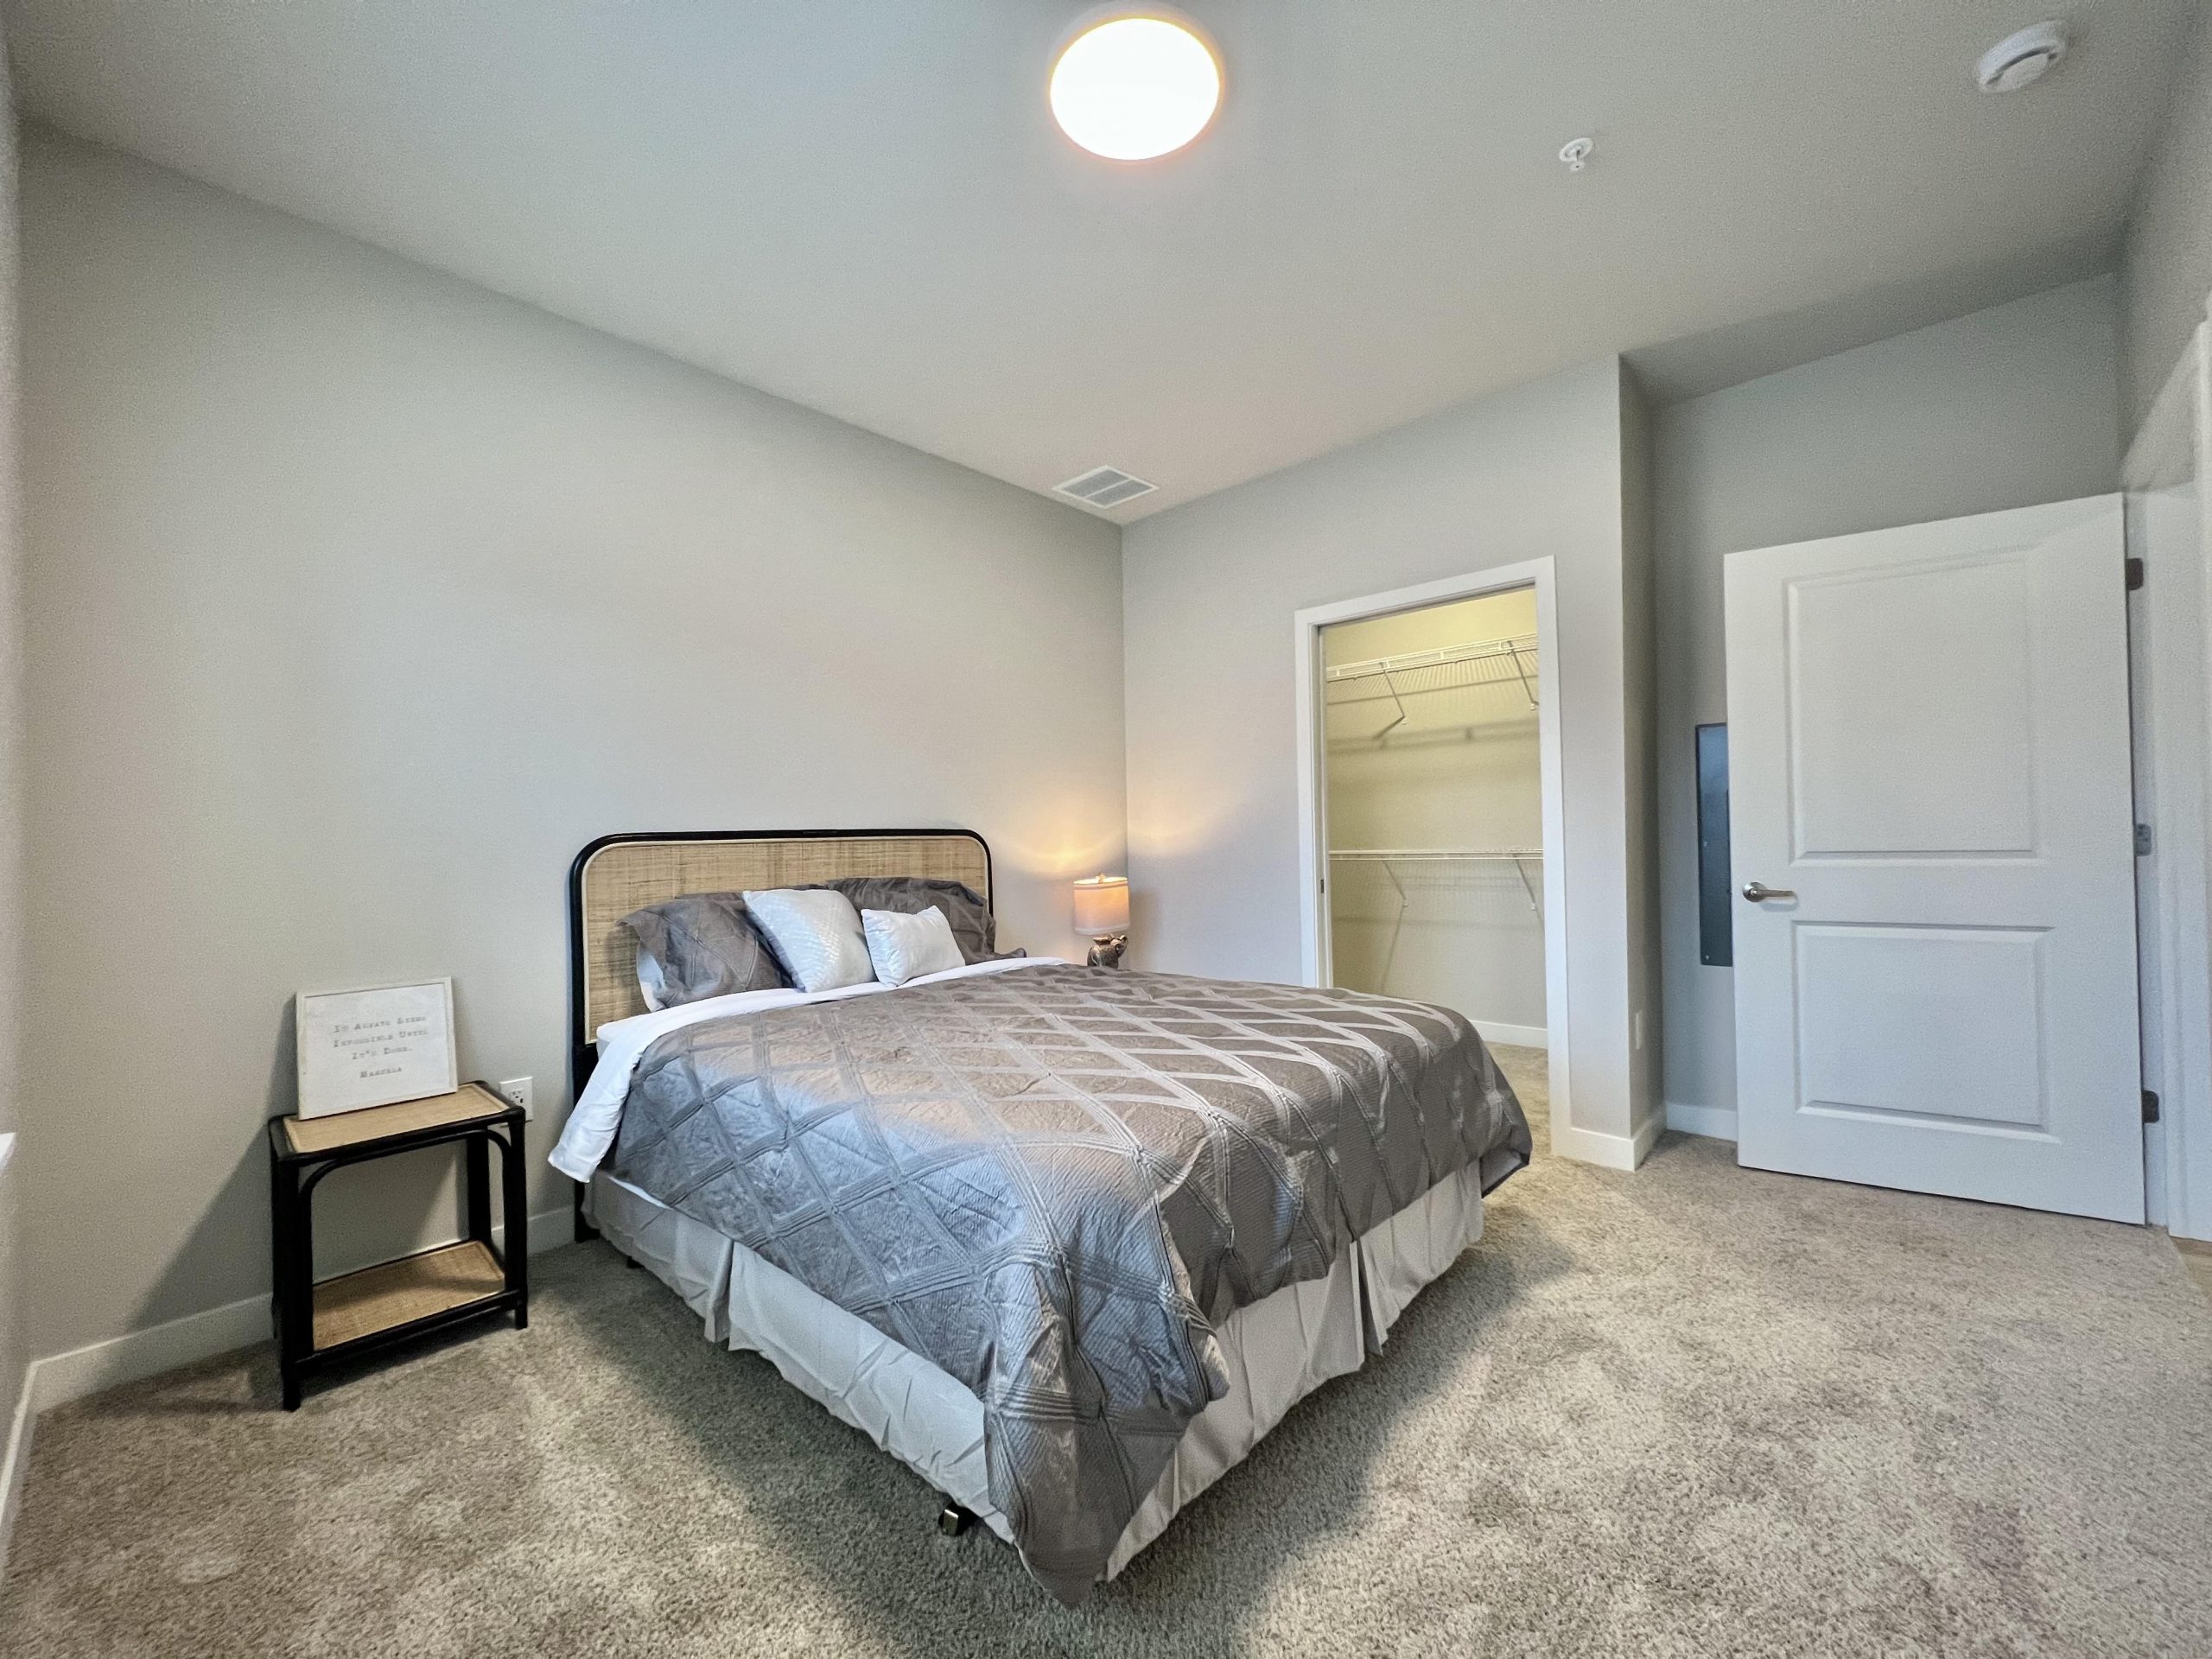 1 bedroom "A" at Water's Edge Apartments in Bloomington